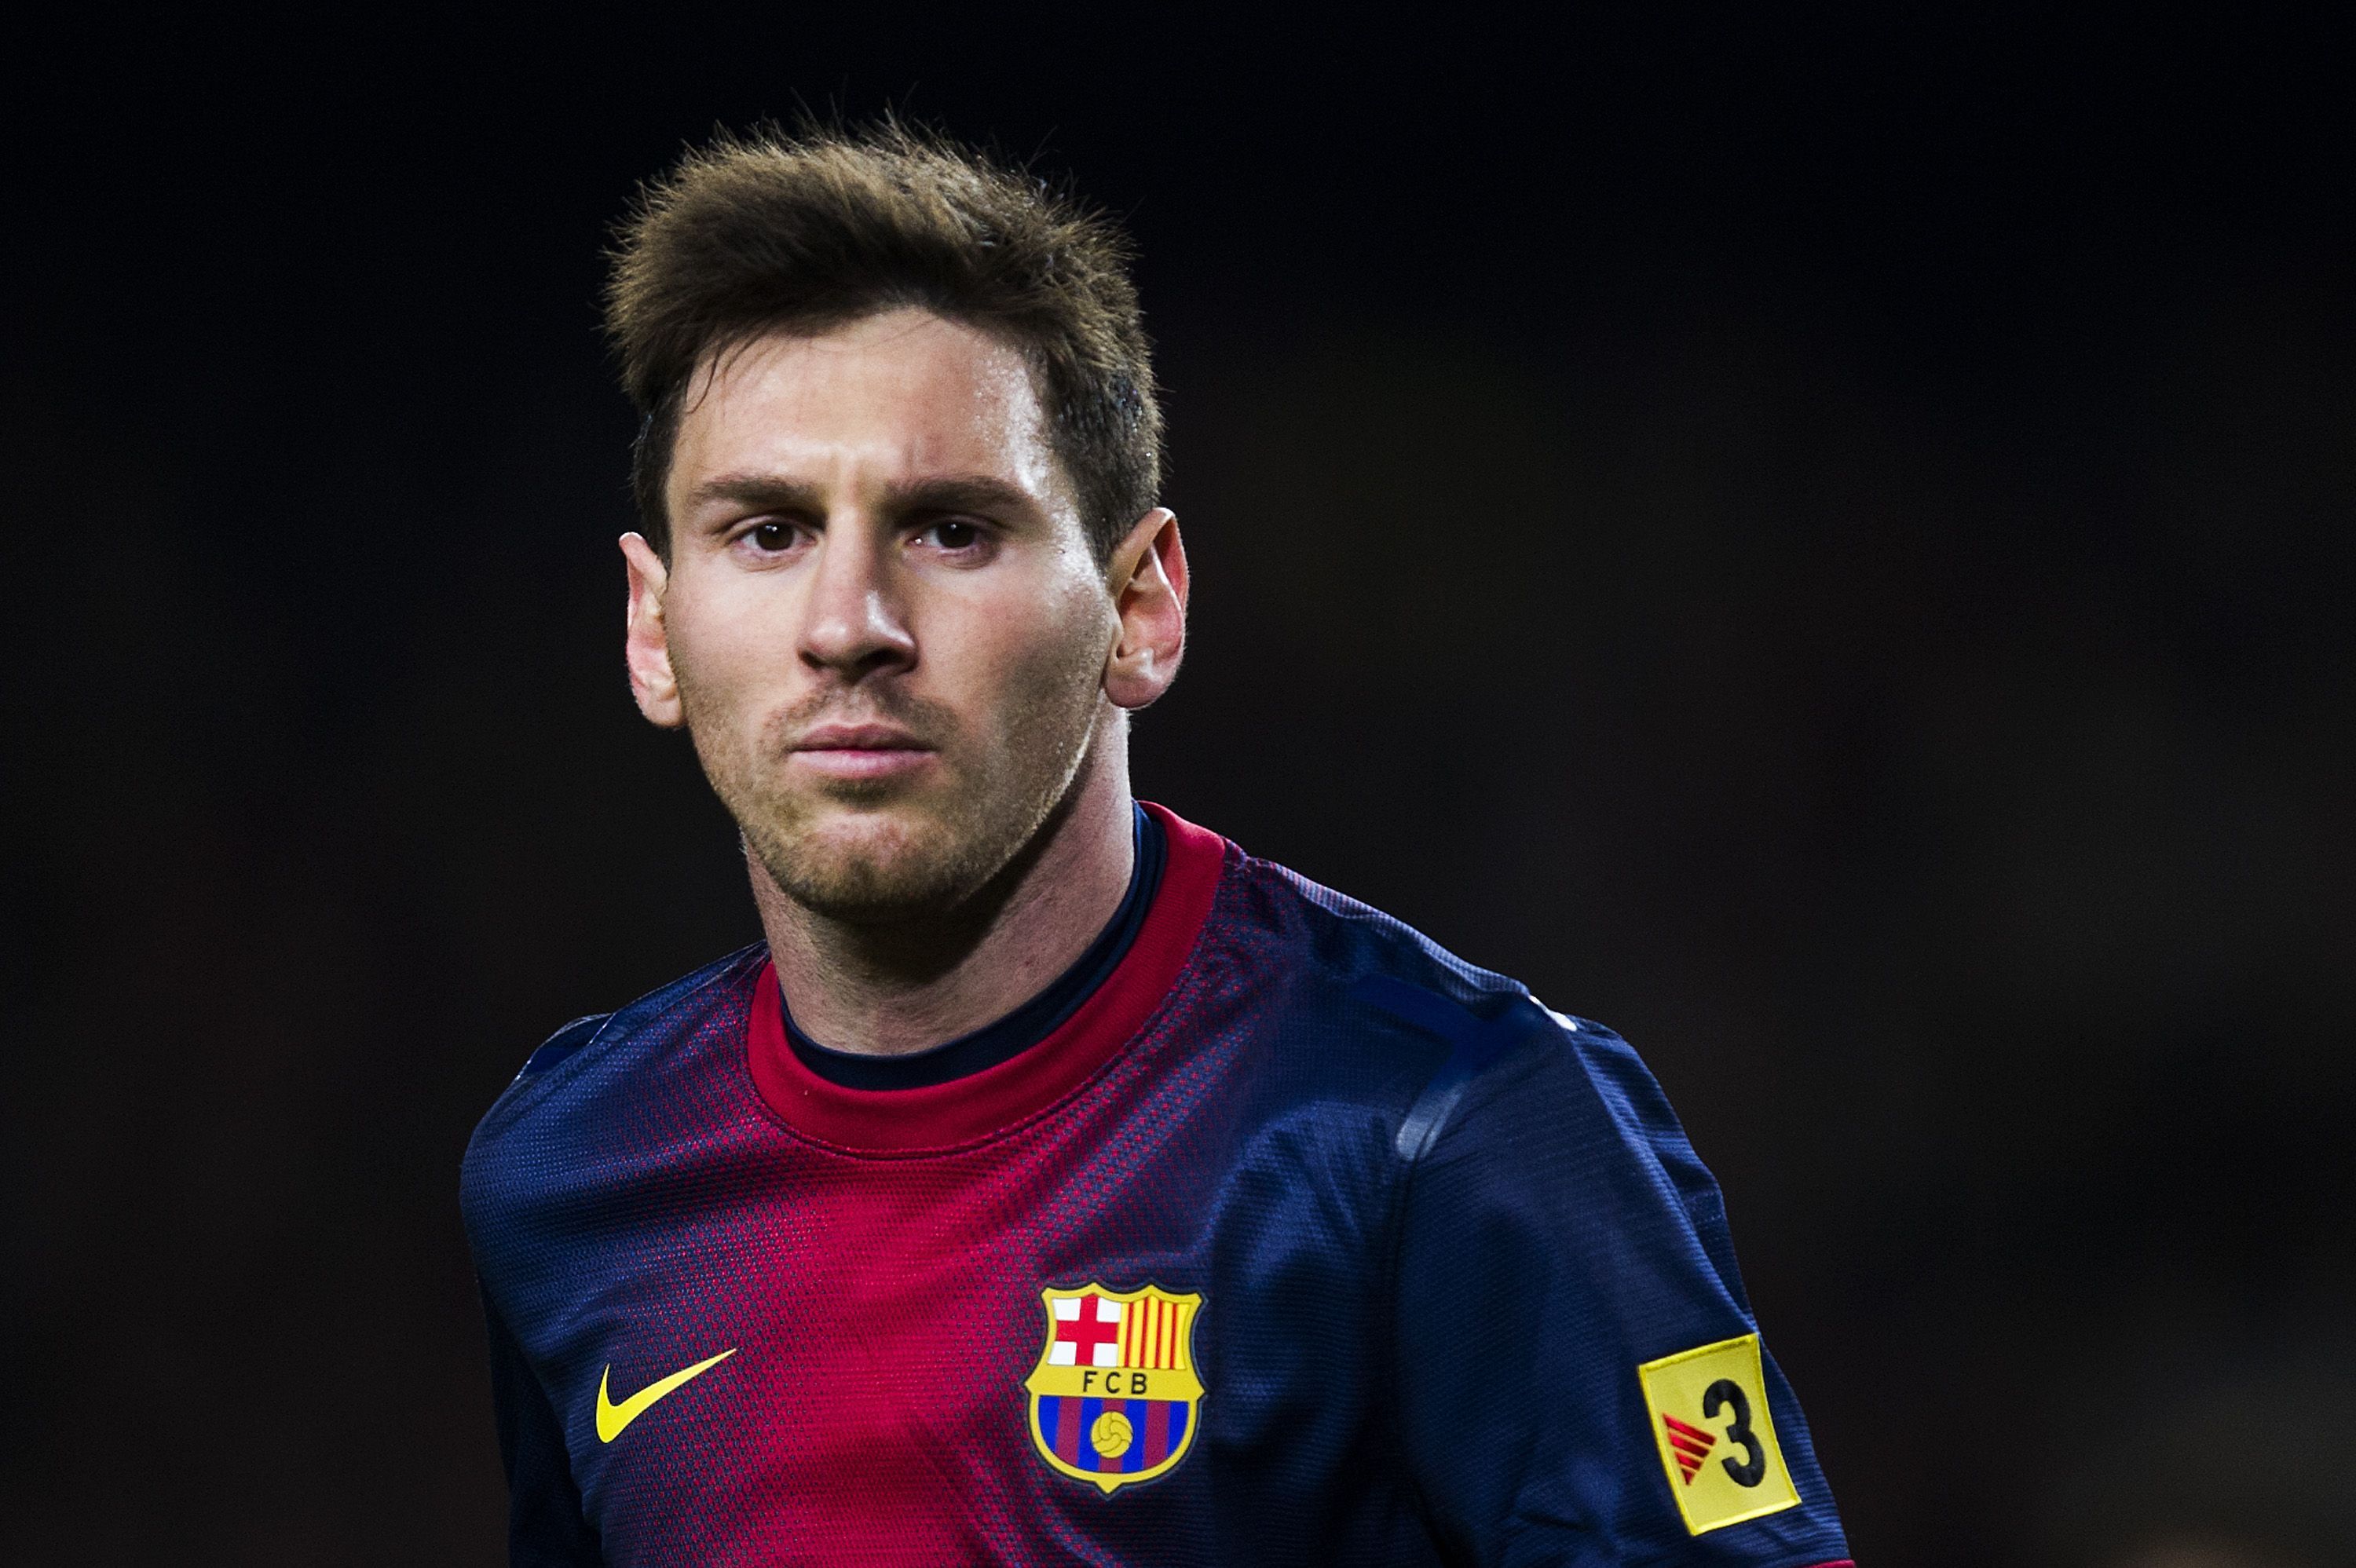 Lionel Messi Wallpapers 2015 HD | Wallpapers, Backgrounds, Images ...